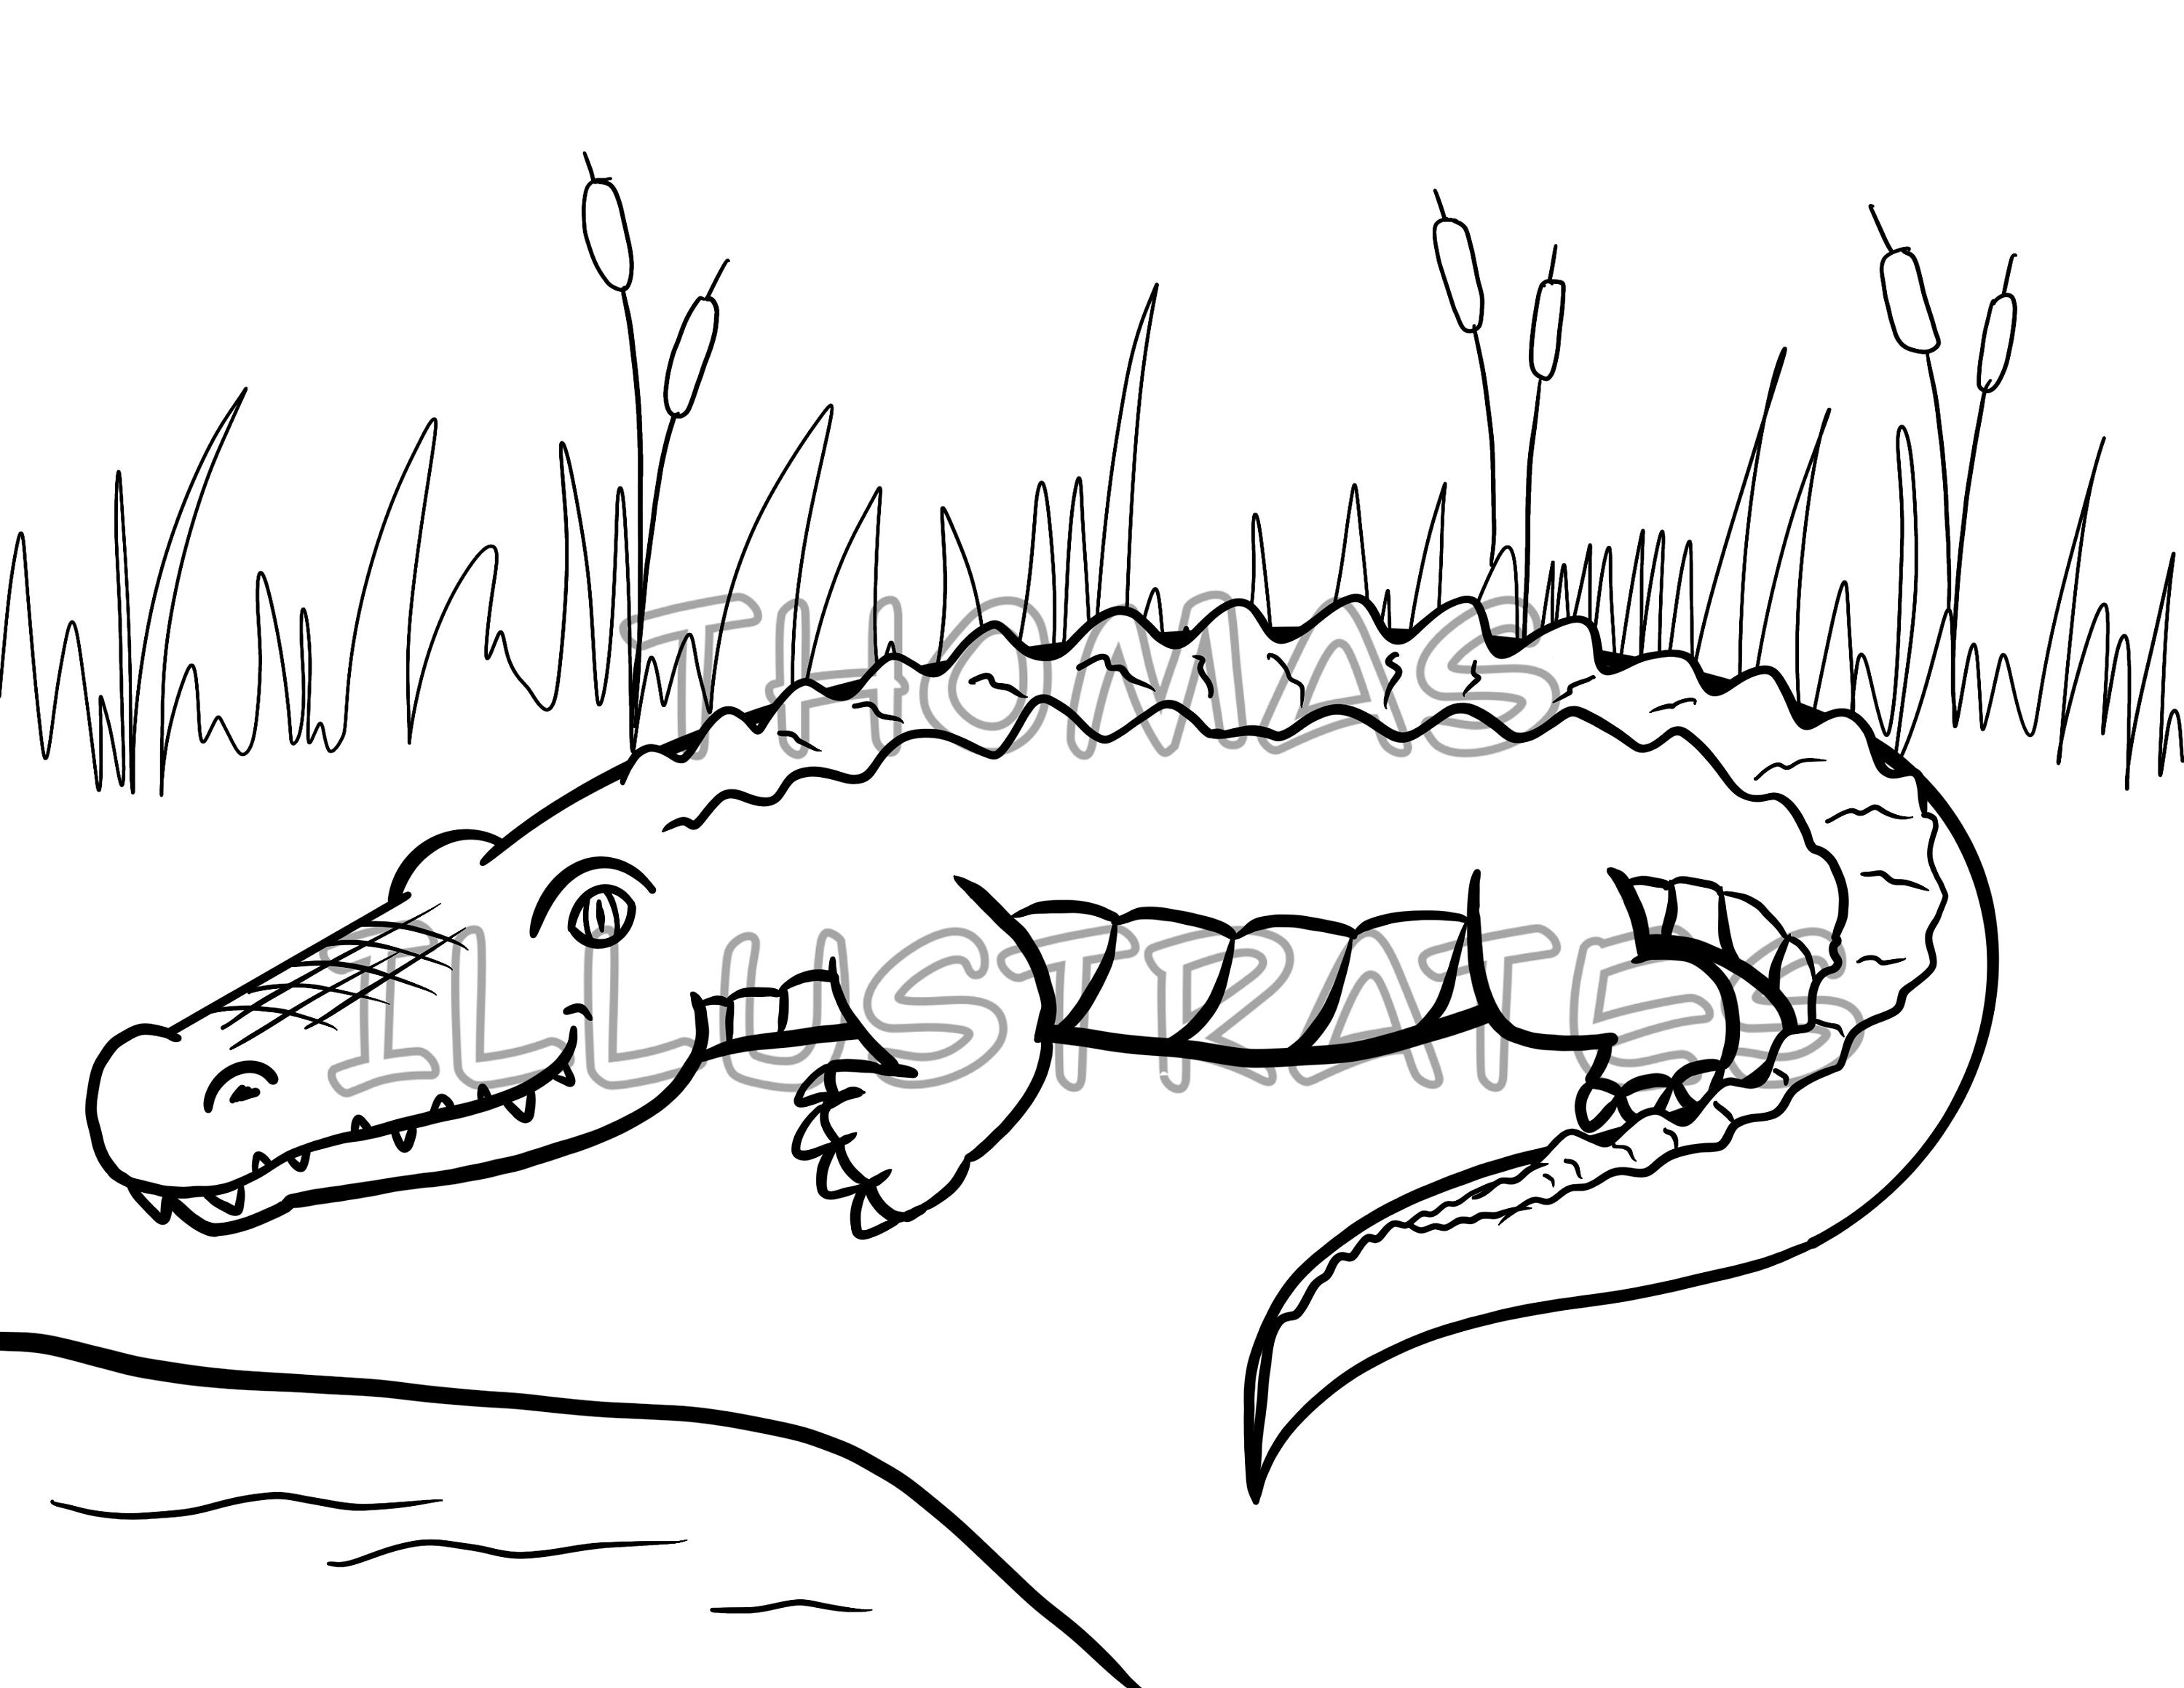 reptile-coloring-pages-kids-coloring-pages-fun-coloring-etsy-uk